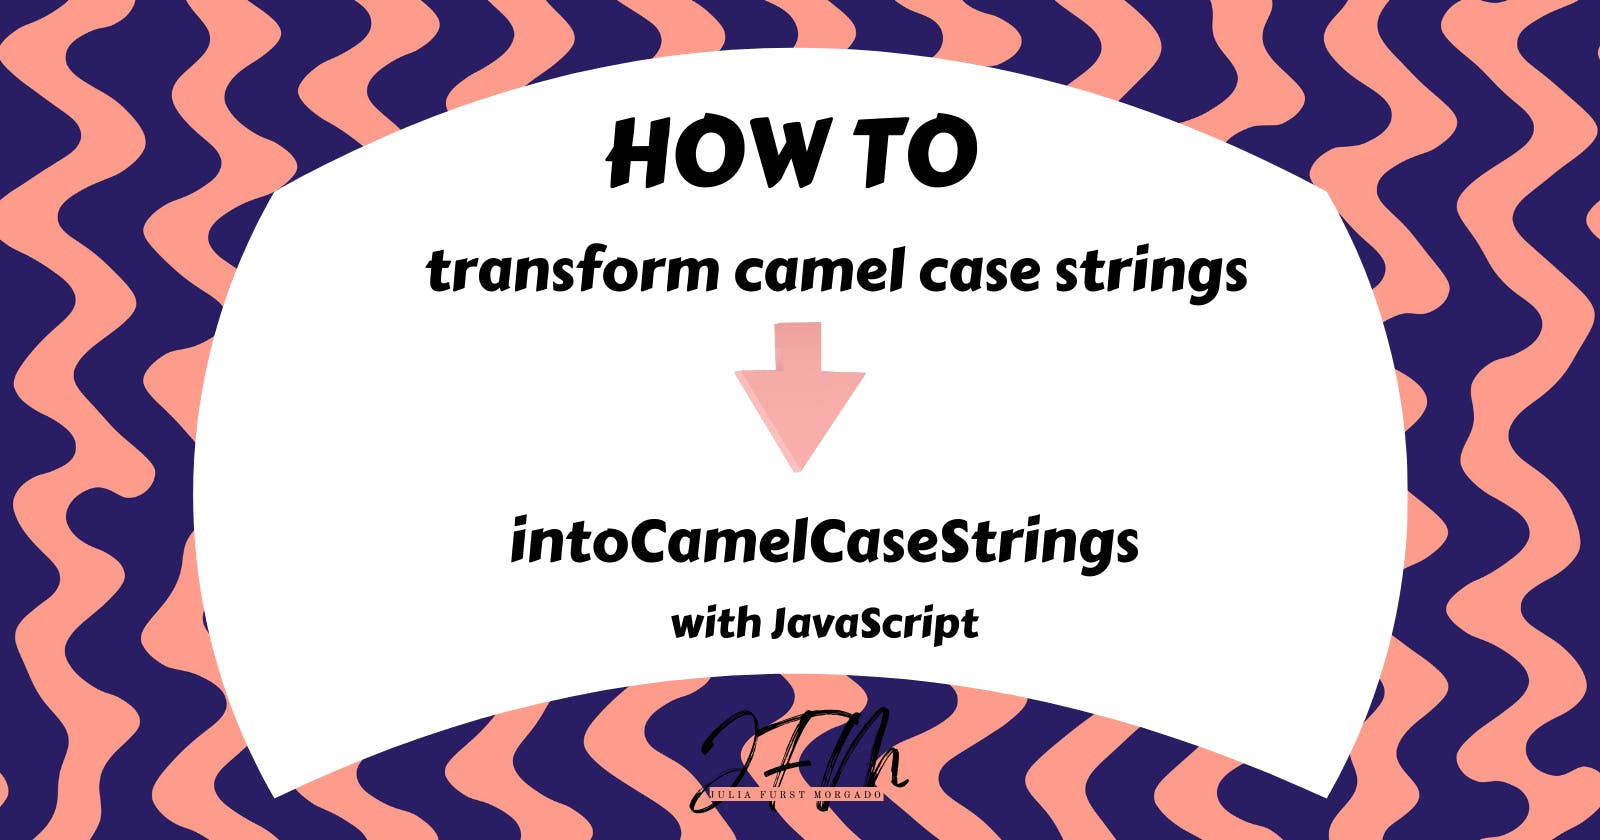 Converting strings into camelCased strings